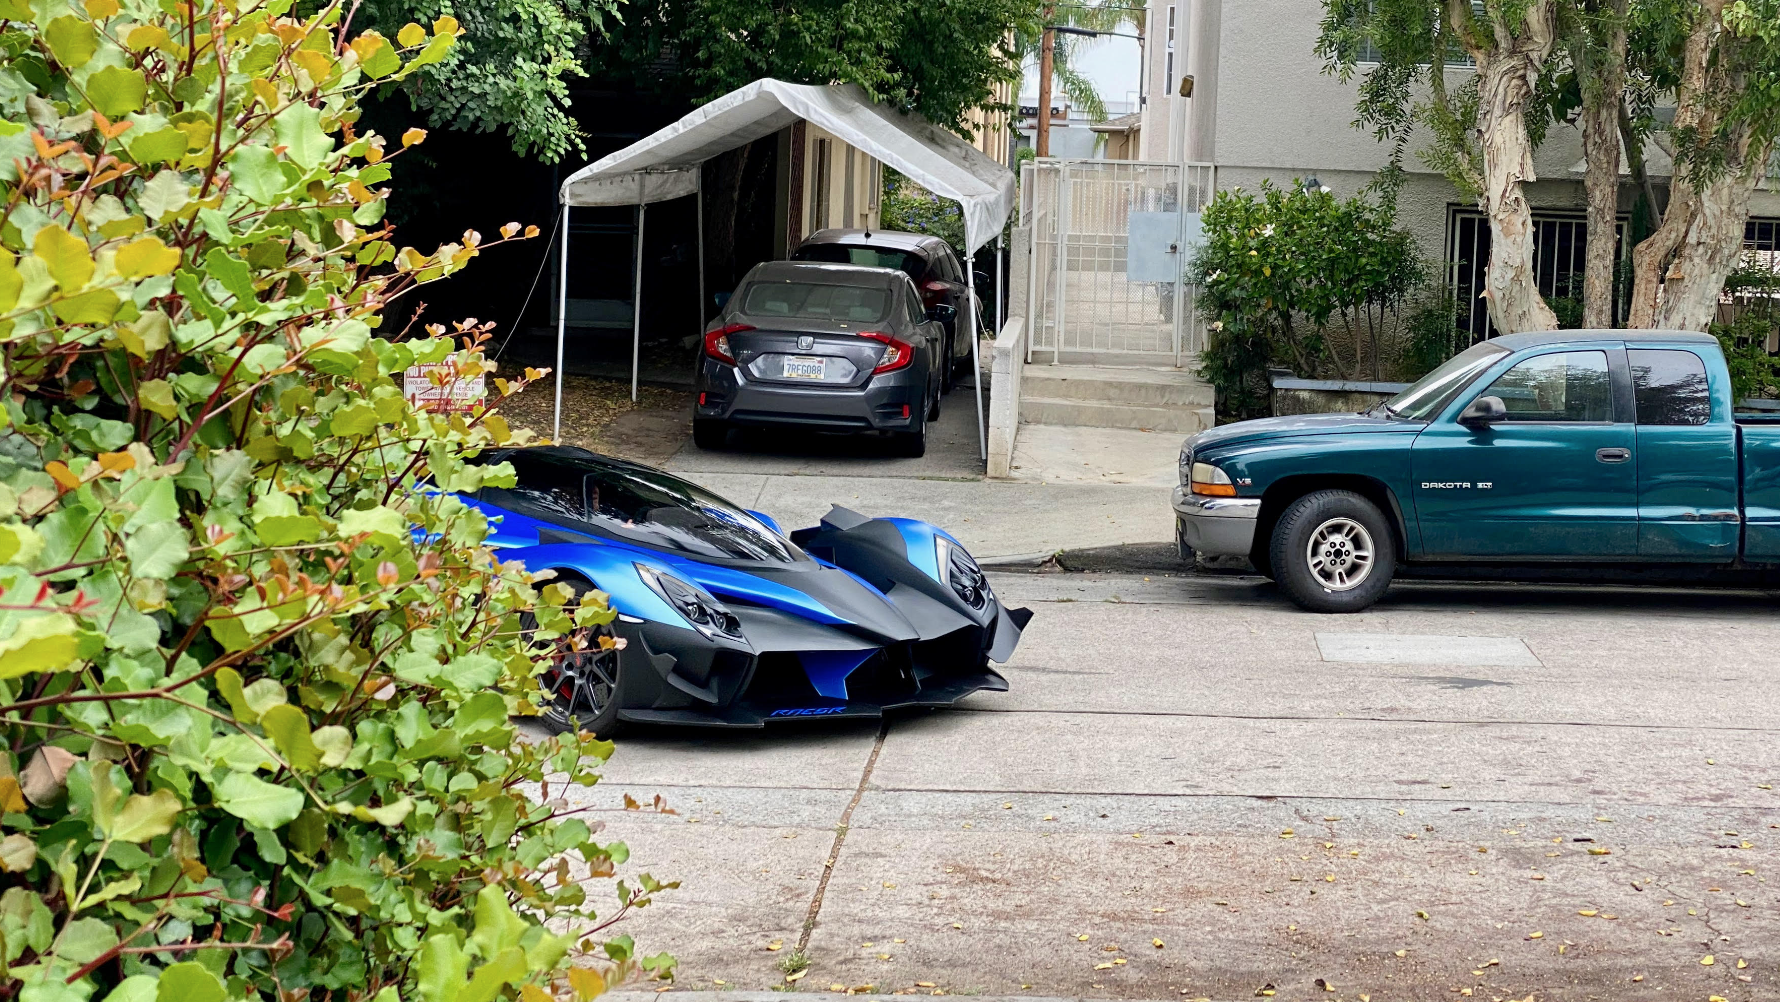 This Absurdly Rare 1,250 HP Electric Hypercar Was Spotted Tooling Around An LA Neighborhood Like NBD